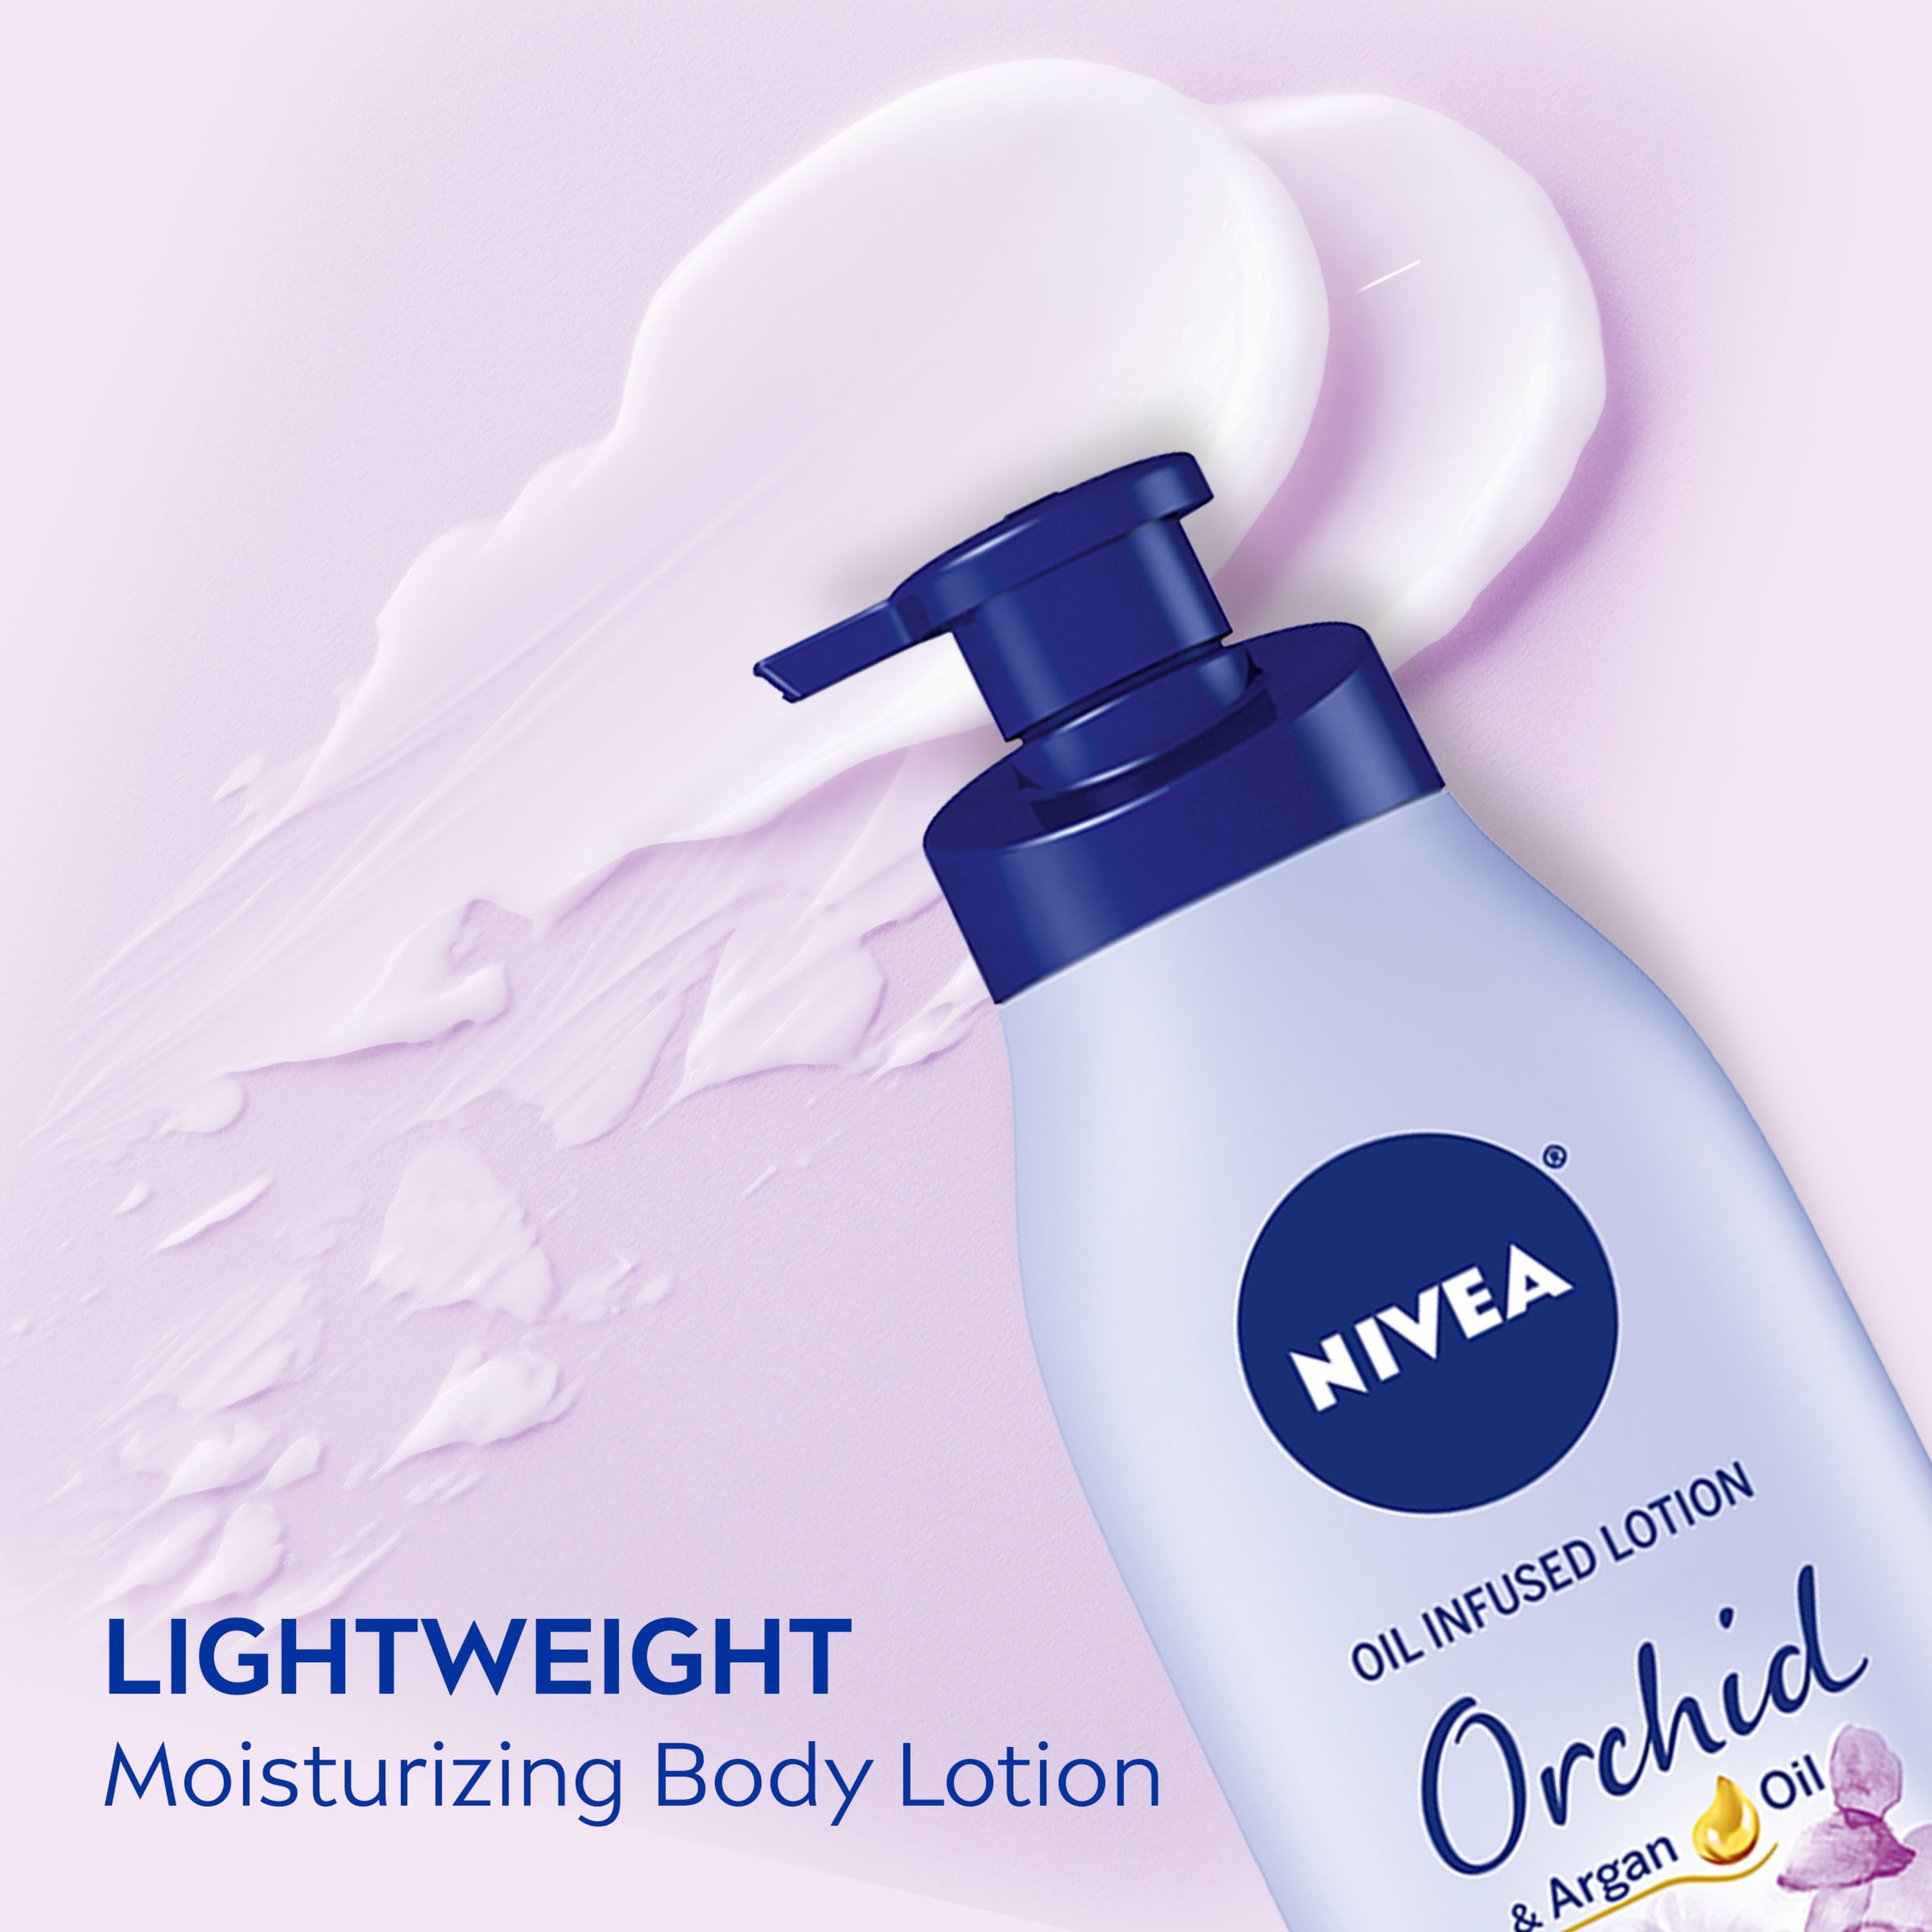 NIVEA Oil Infused Body Lotion, Orchid and Argan Oil, 16.9 Fl Oz Pump Bottle - image 3 of 13